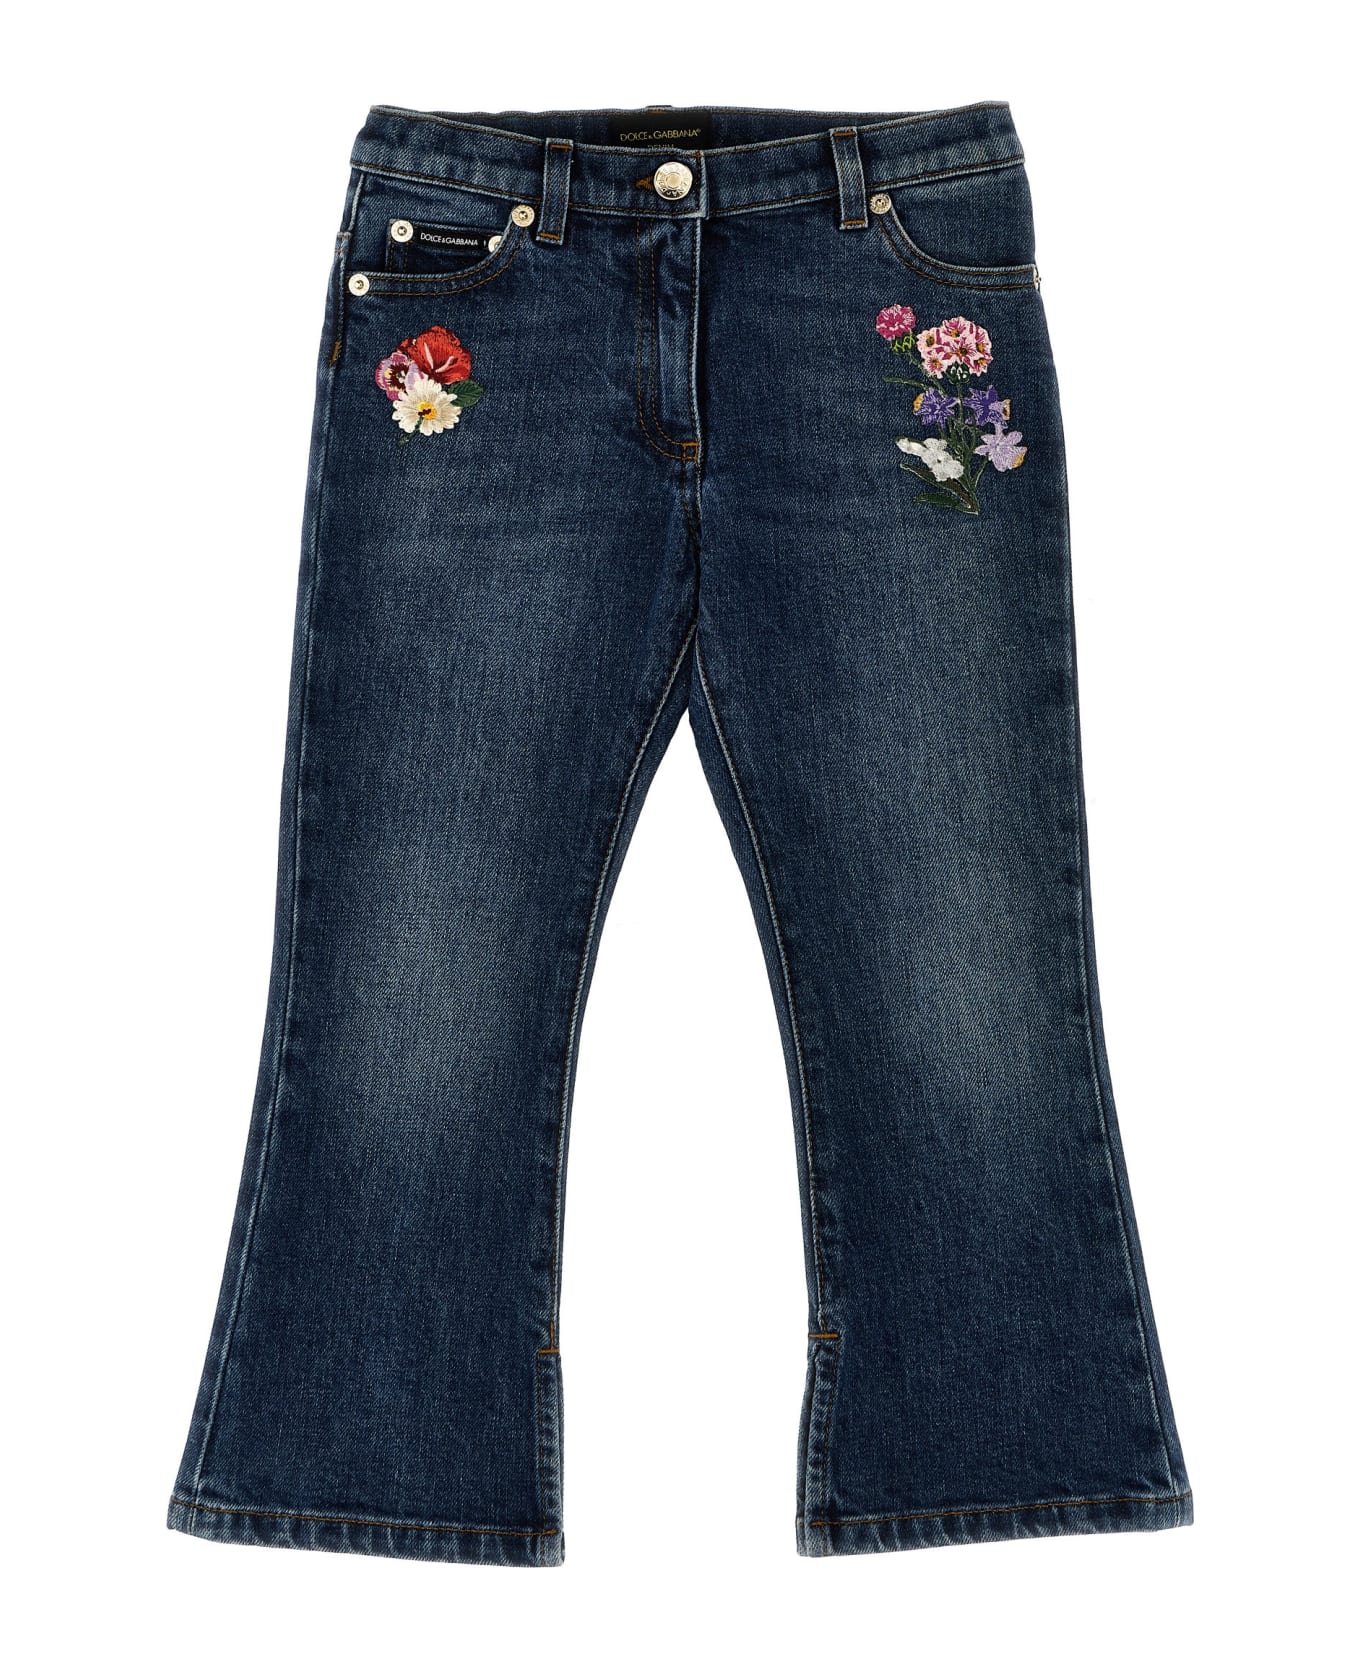 Dolce & Gabbana Embroidery Jeans - BLUE